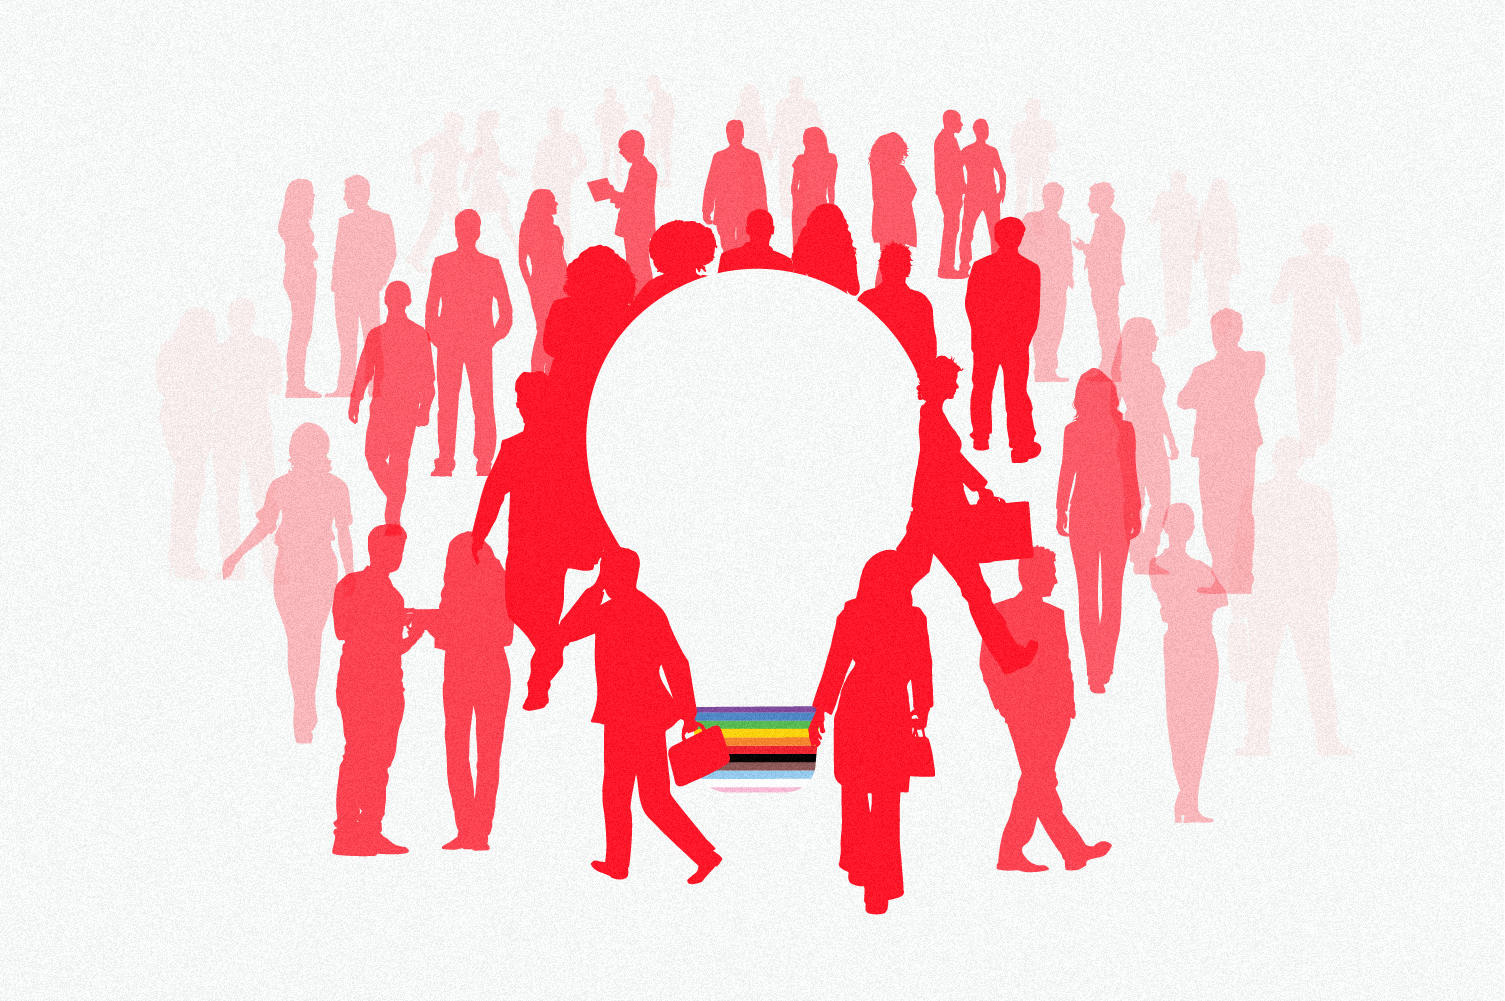  Diverse and inclusive teams is depicted with silhouettes  of people arranged in the outline of a person's head.